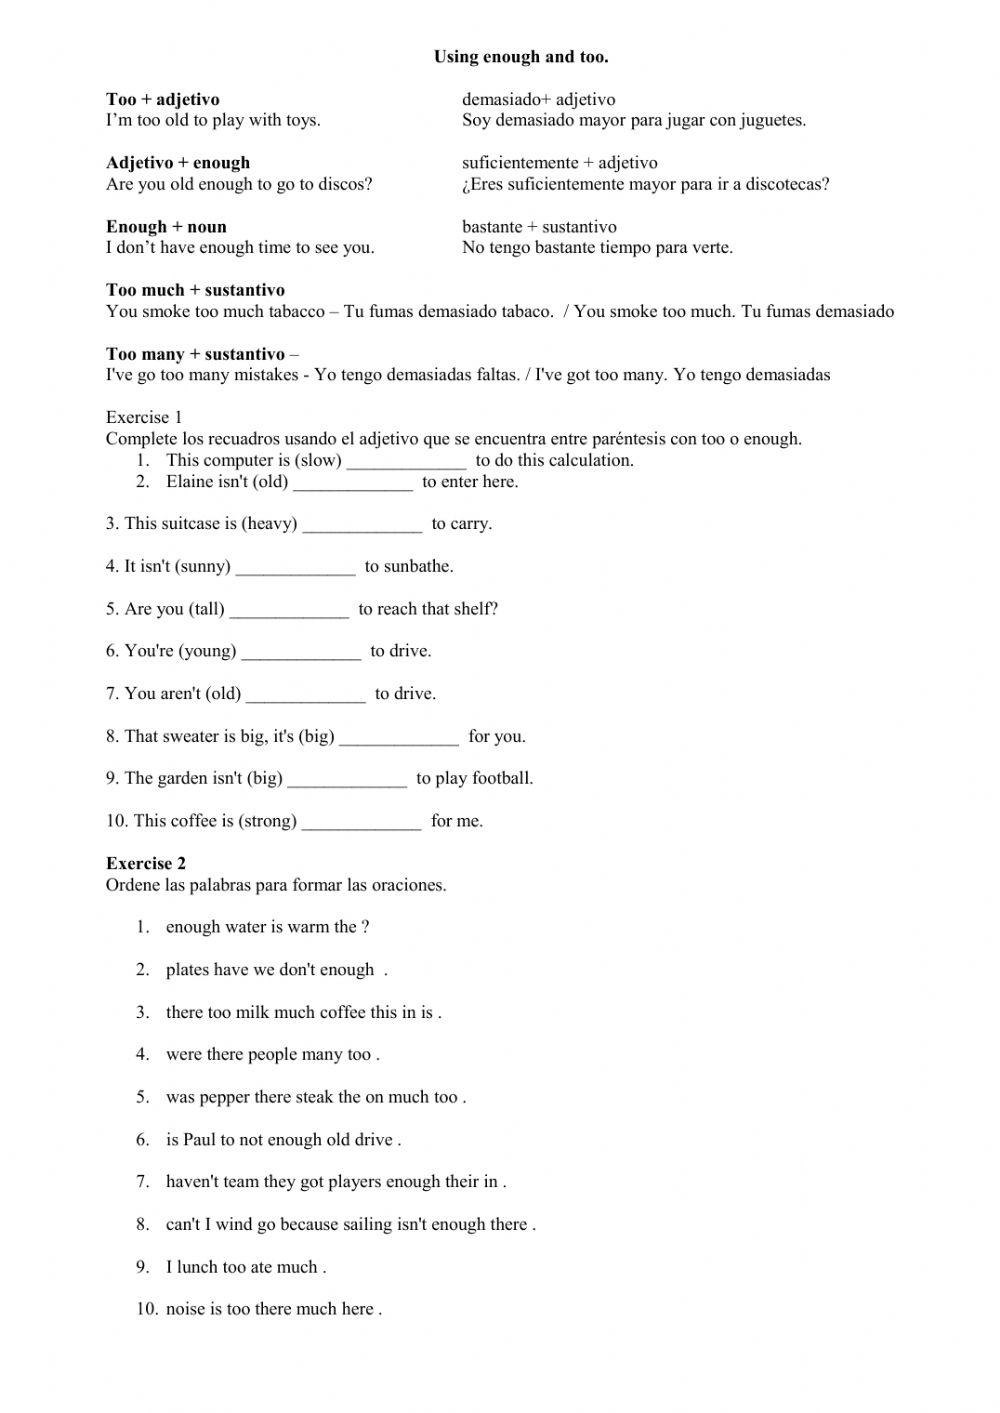 Too or Enough activity | Live Worksheets